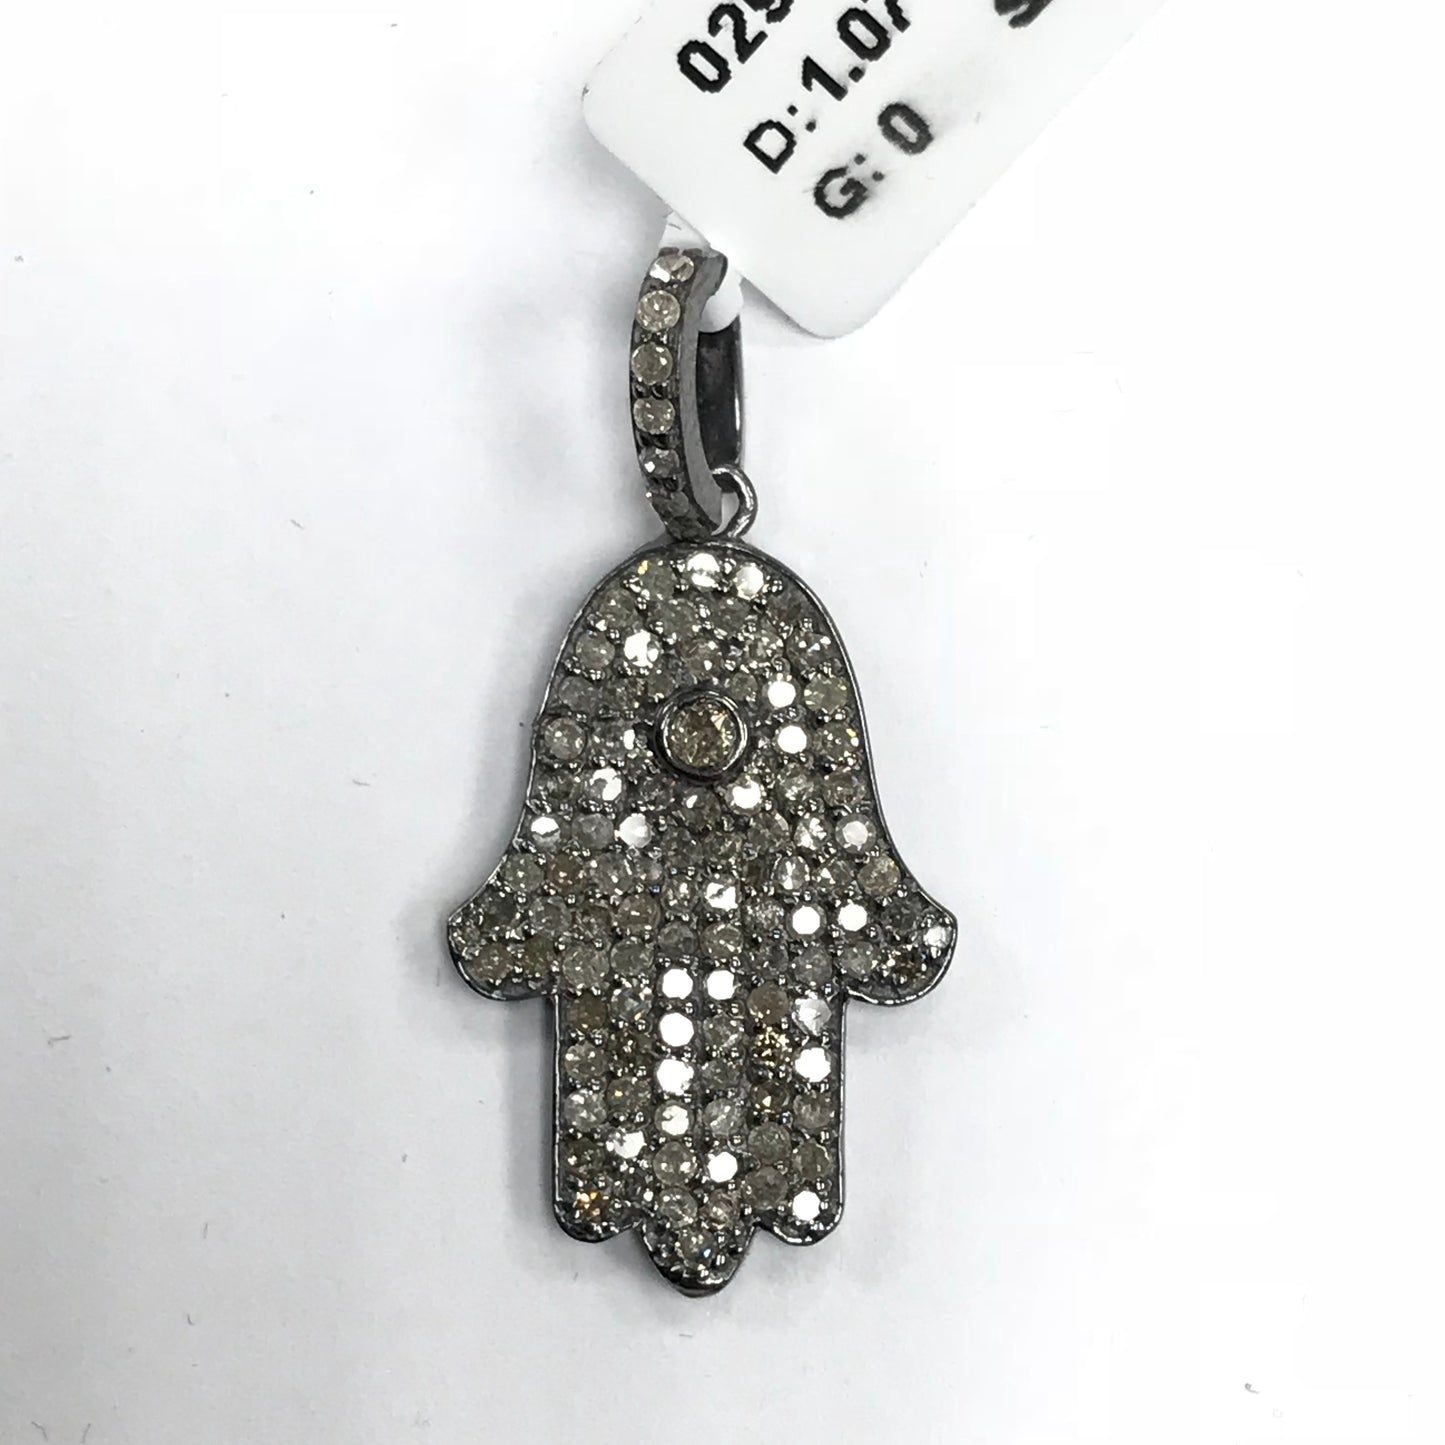 Pave Diamond Detail on Charms, Gorgeous Piece Sizzling Beautifully hamsa Hand Shape Awesome Pendant.